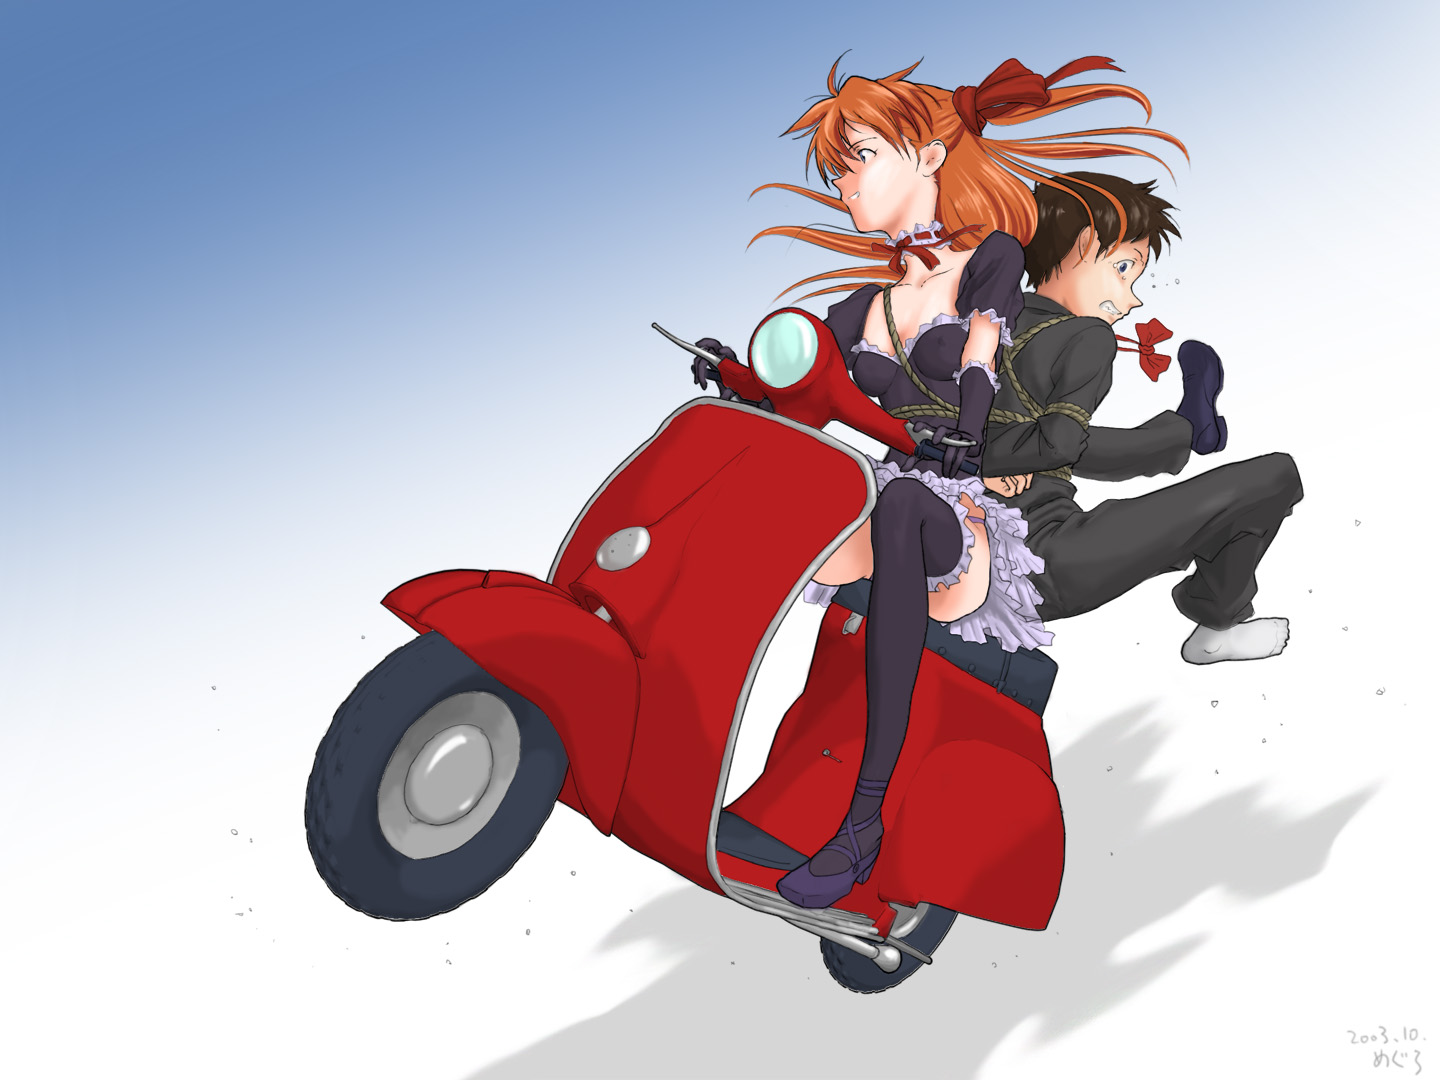 And Naota On Moped Anime Wallpaper Image Featuring Flcl Fooly Cooly